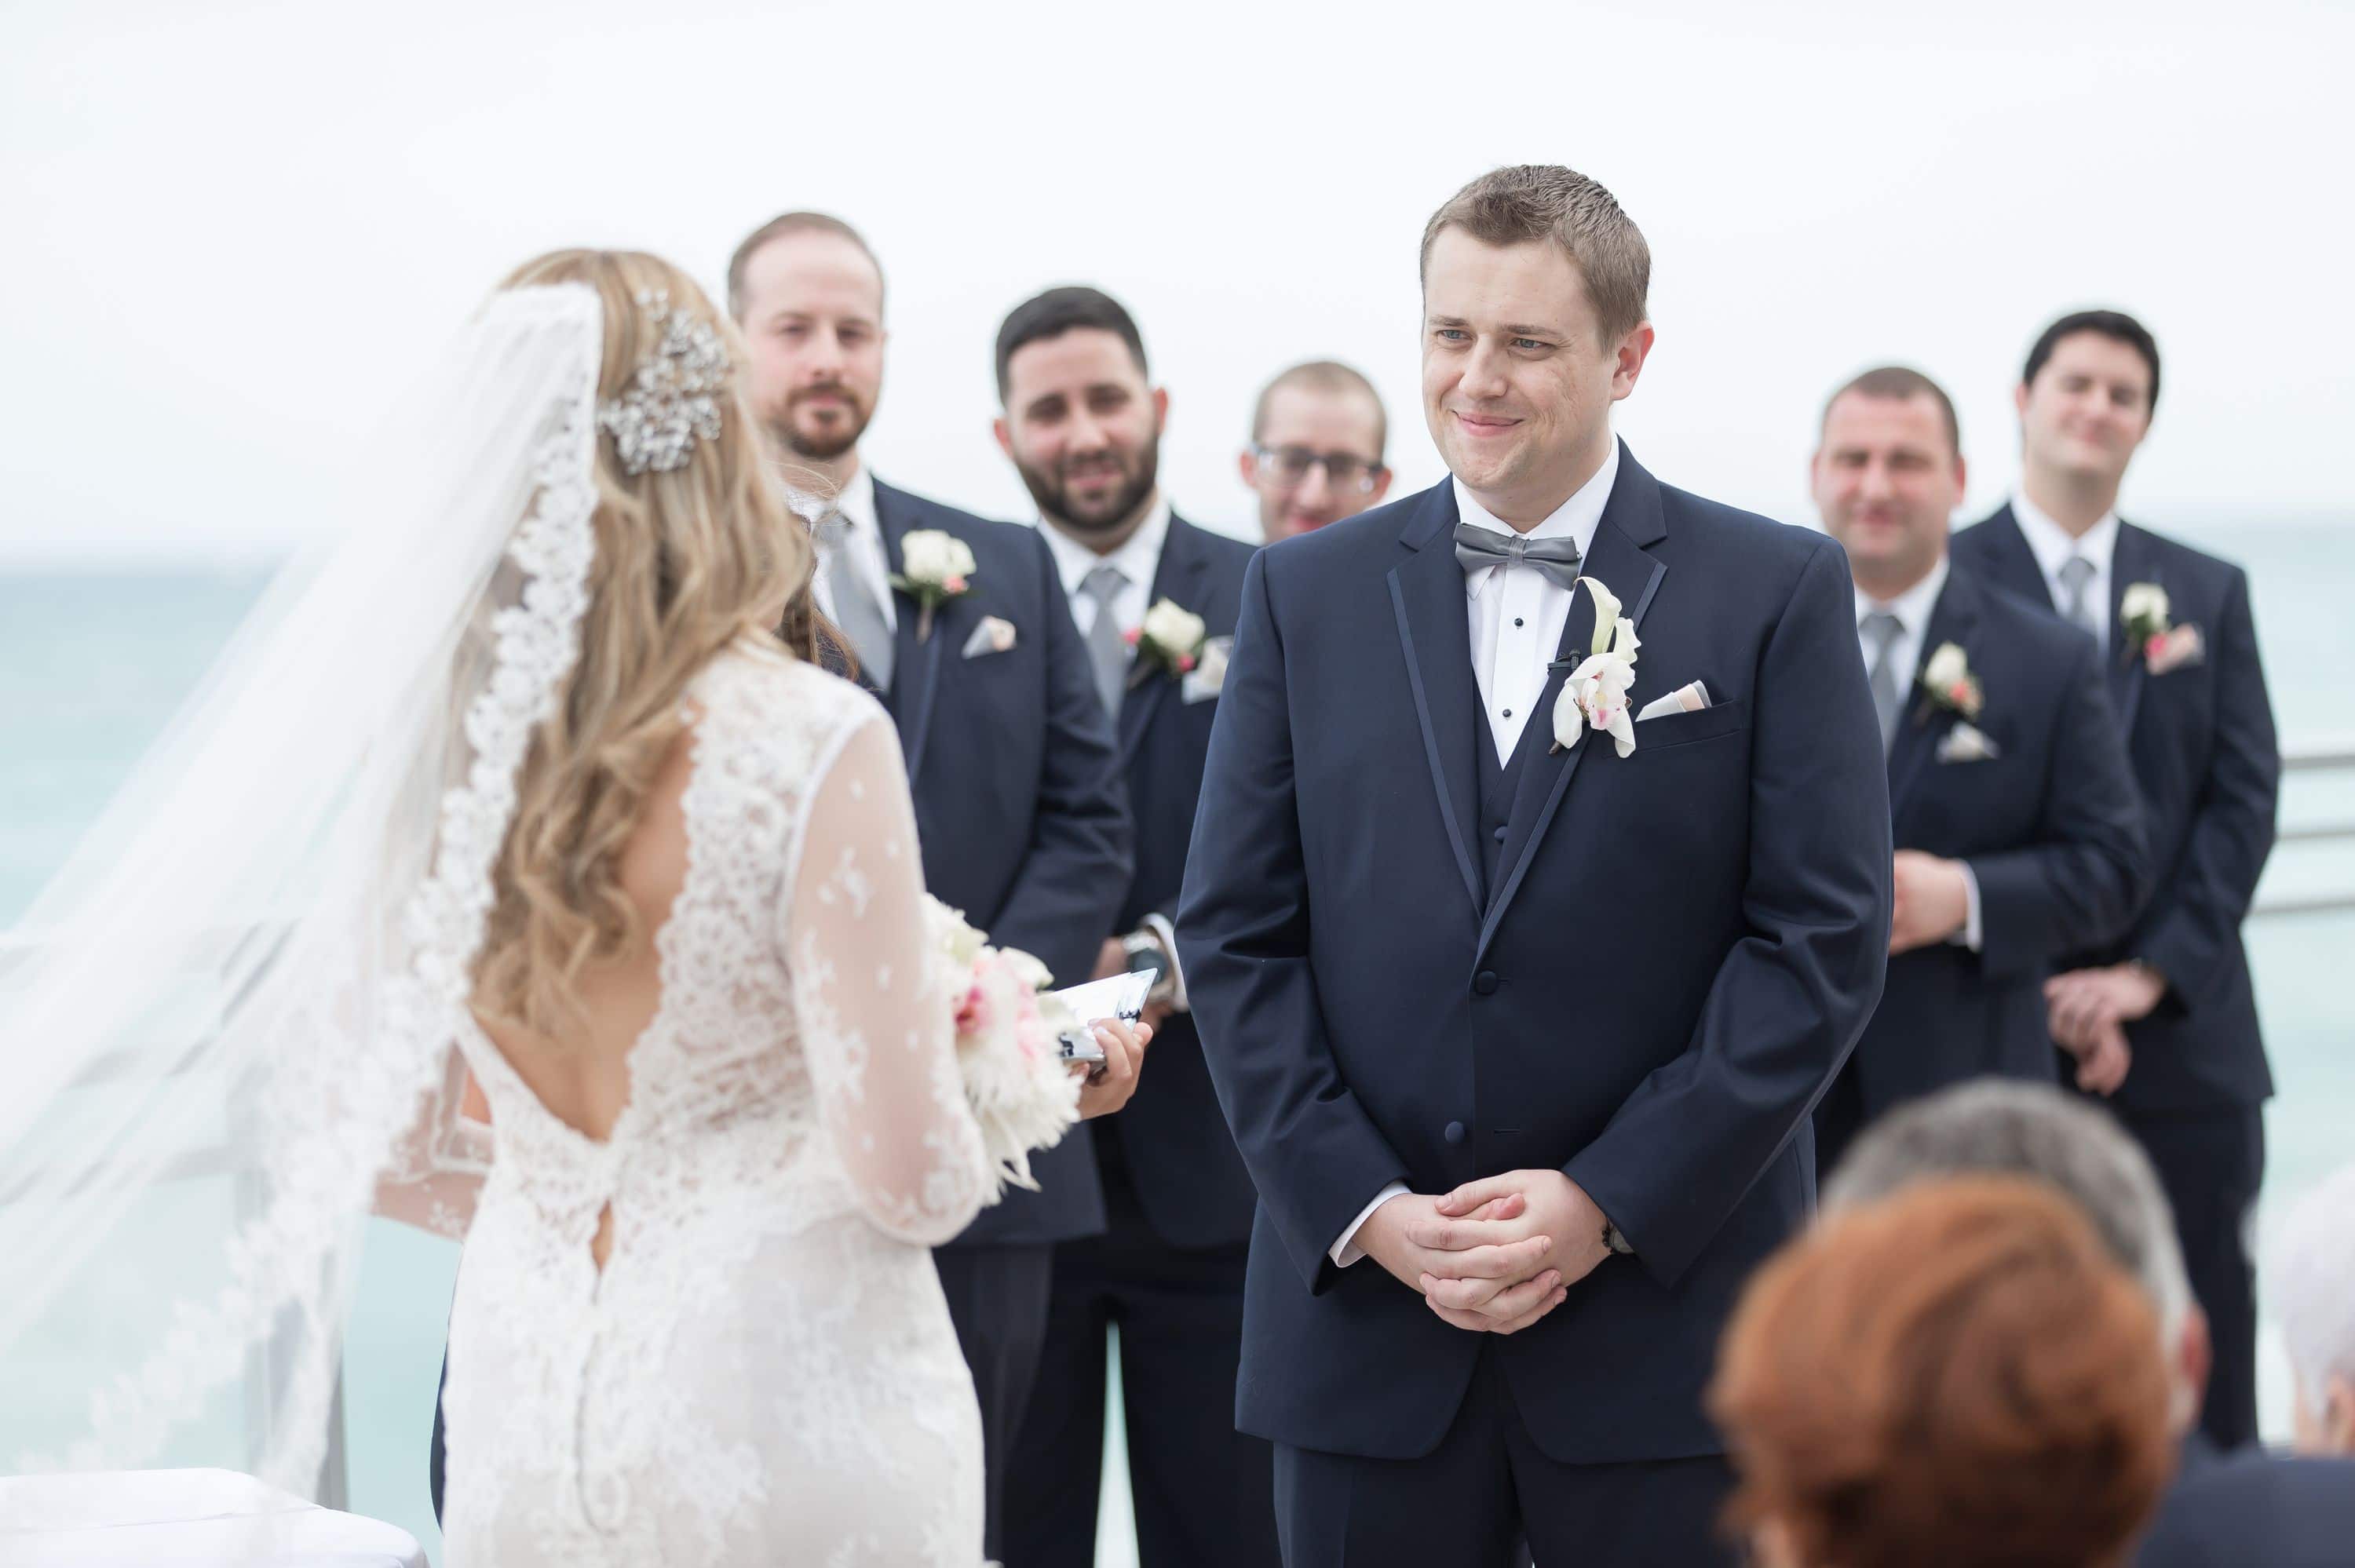 Candid shot of the groom during the ceremony at this Diplomat Beach Resort Wedding